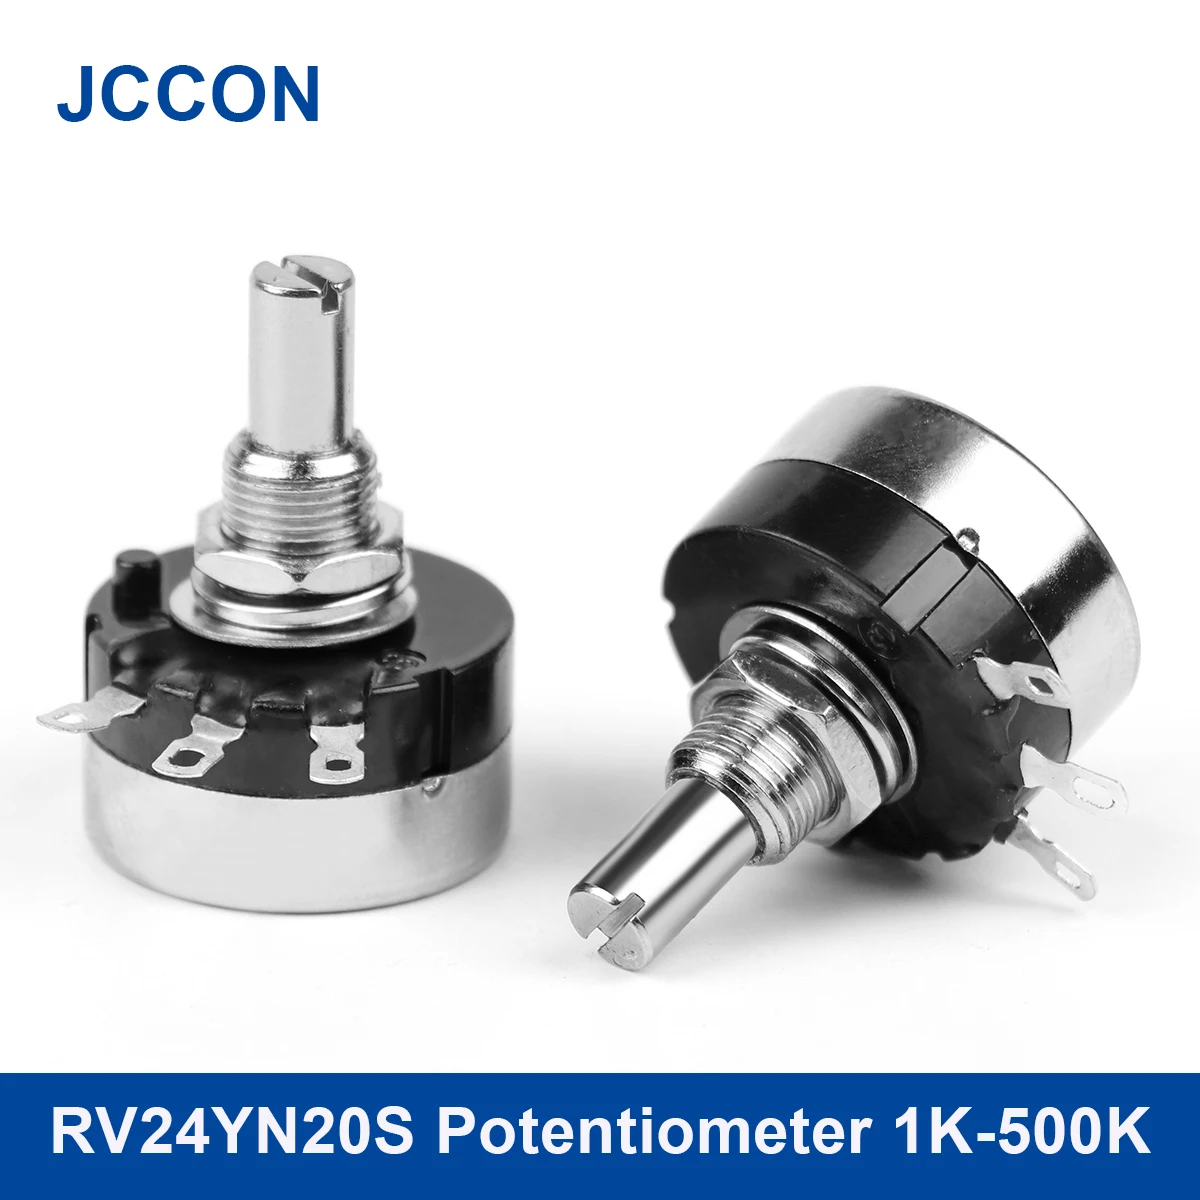 1Pcs RV24YN20S Potentiometer 1K 2K 20K 50K 100K 200K 500K Single-turn Carbon Film Potentiometer Vertical Rotary Switches 1pcs rv24yn20s potentiometer 1k 10r 1m 200r 2m 3k 100k 200k 500k 500r adjustable single turn potentiometer